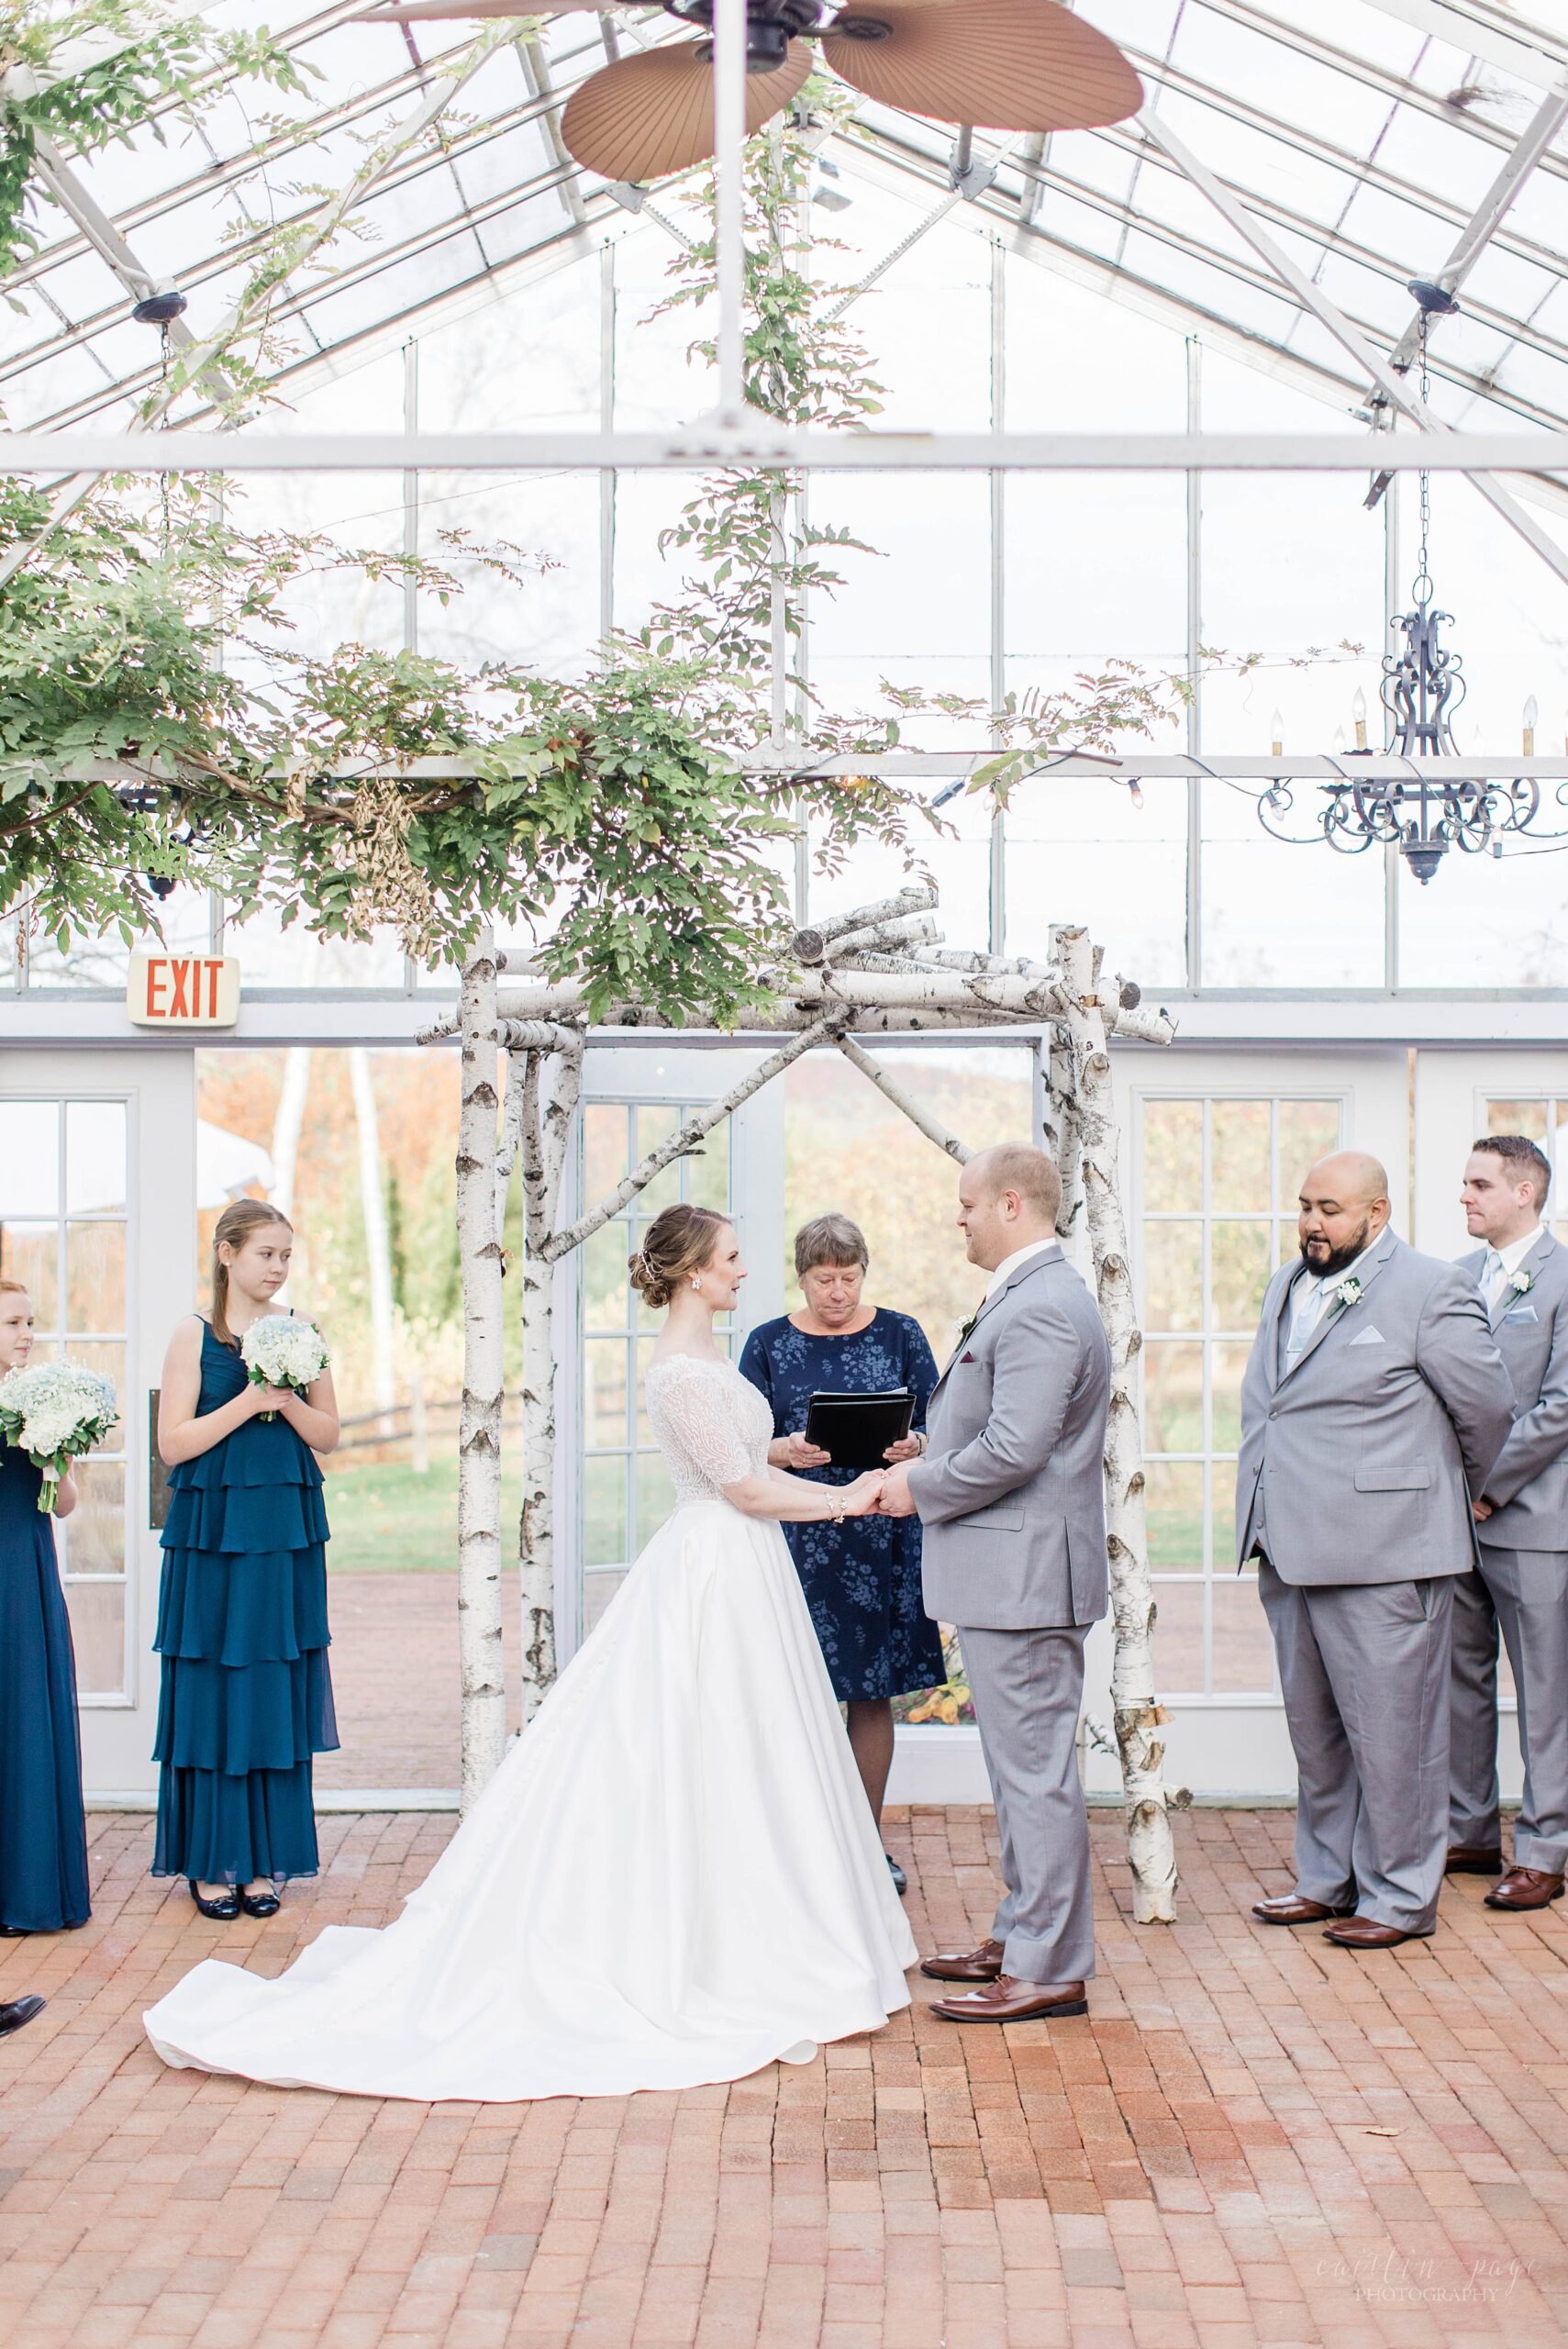 Wedding ceremony in the greenhouse at Barn on the Pemi